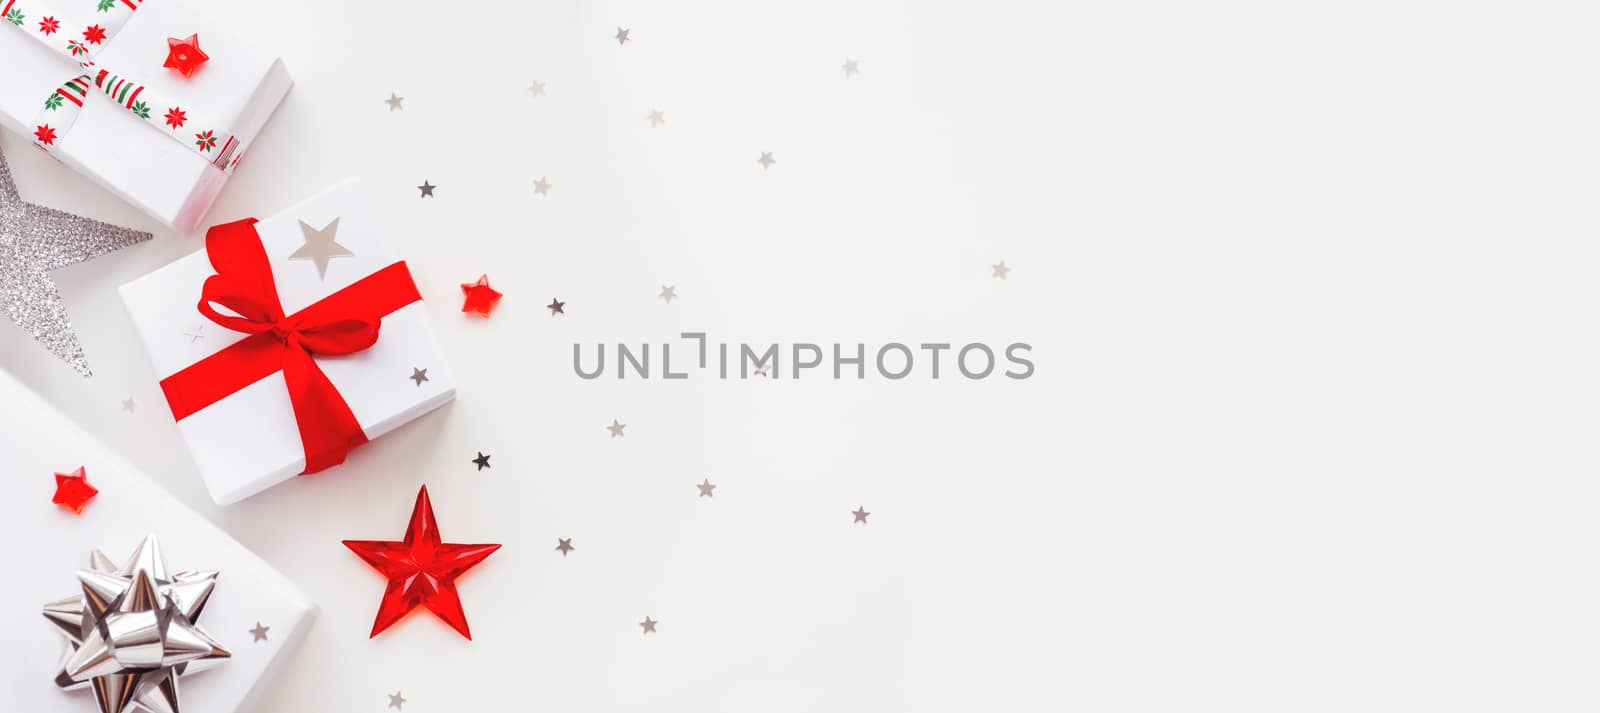 Christmas and New Year banner with presents in white wrapping paper. Holiday gifts with red and silver ribbon and bows. Copy space with silver star confetti.